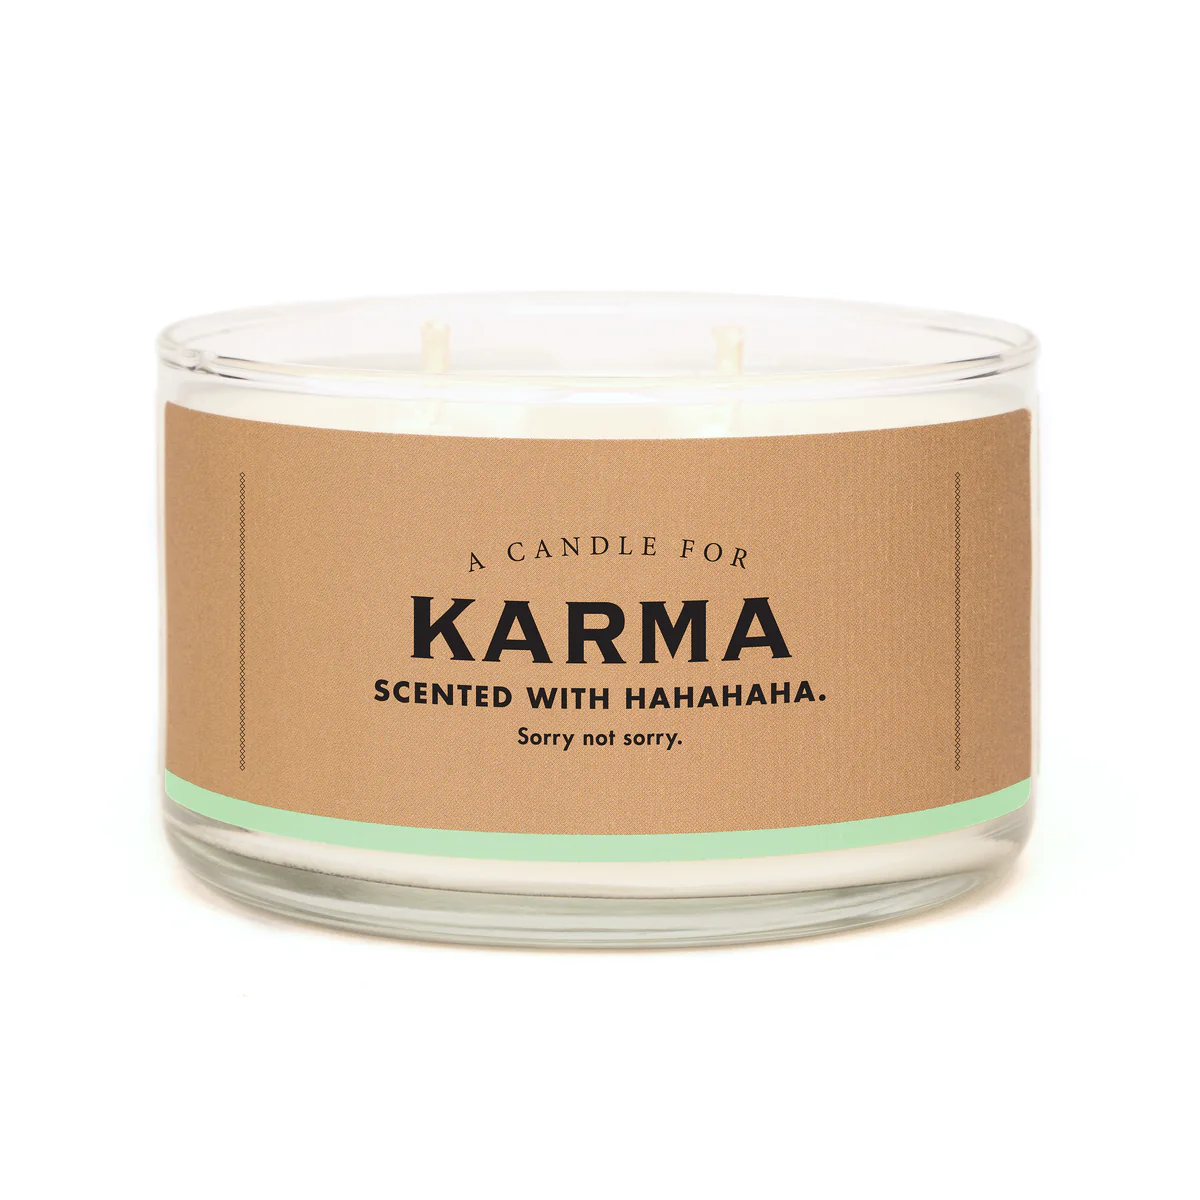 A Candle for Karma - Heart of the Home LV